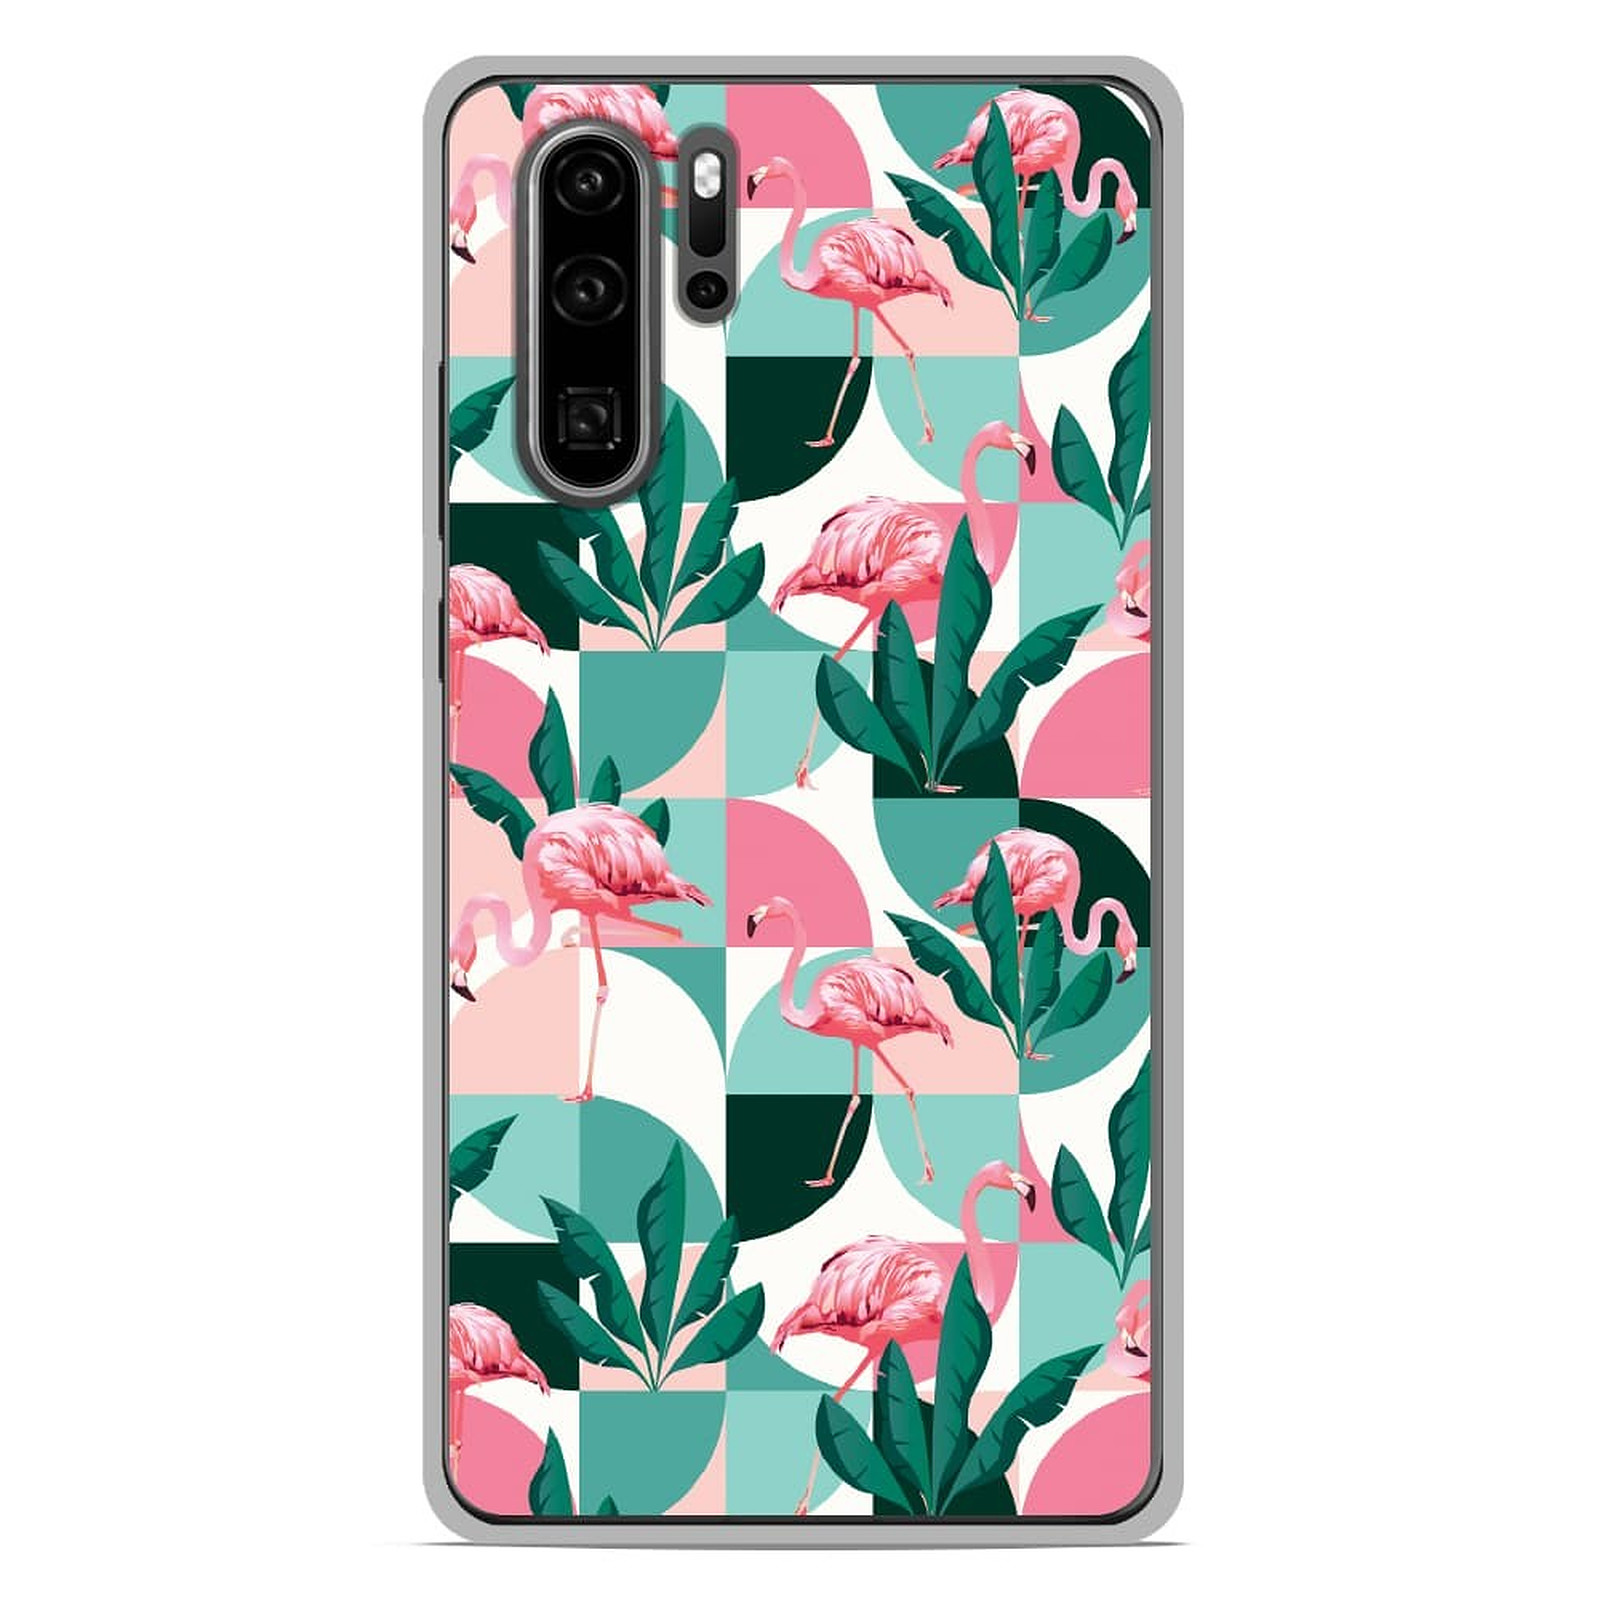 1001 Coques Coque silicone gel Huawei P30 Pro motif Flamants Roses ge´ome´trique - Coque telephone 1001Coques